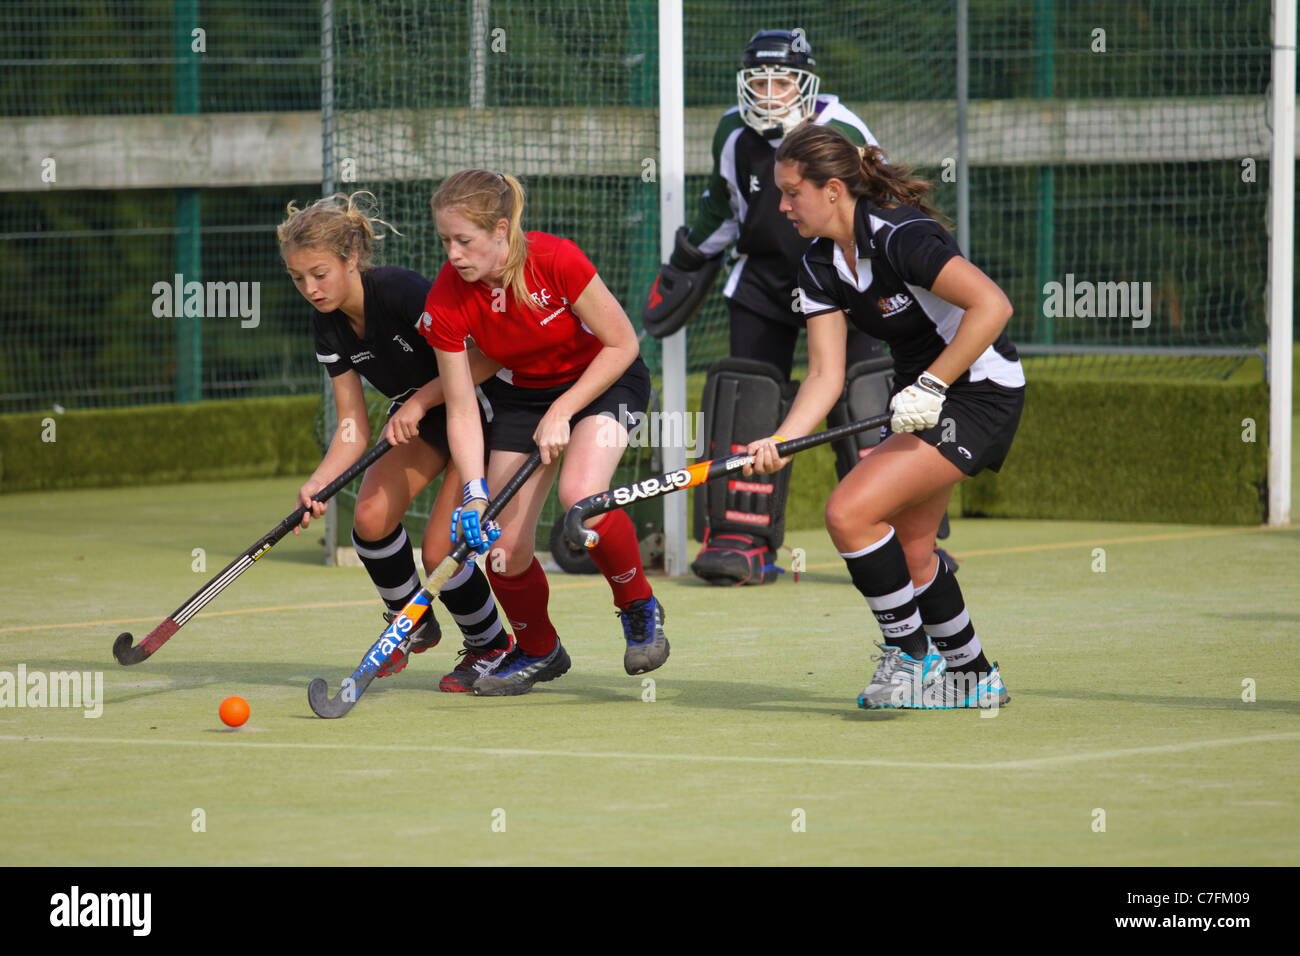 Female hockey players in action on an astro turf pitch Stock Photo